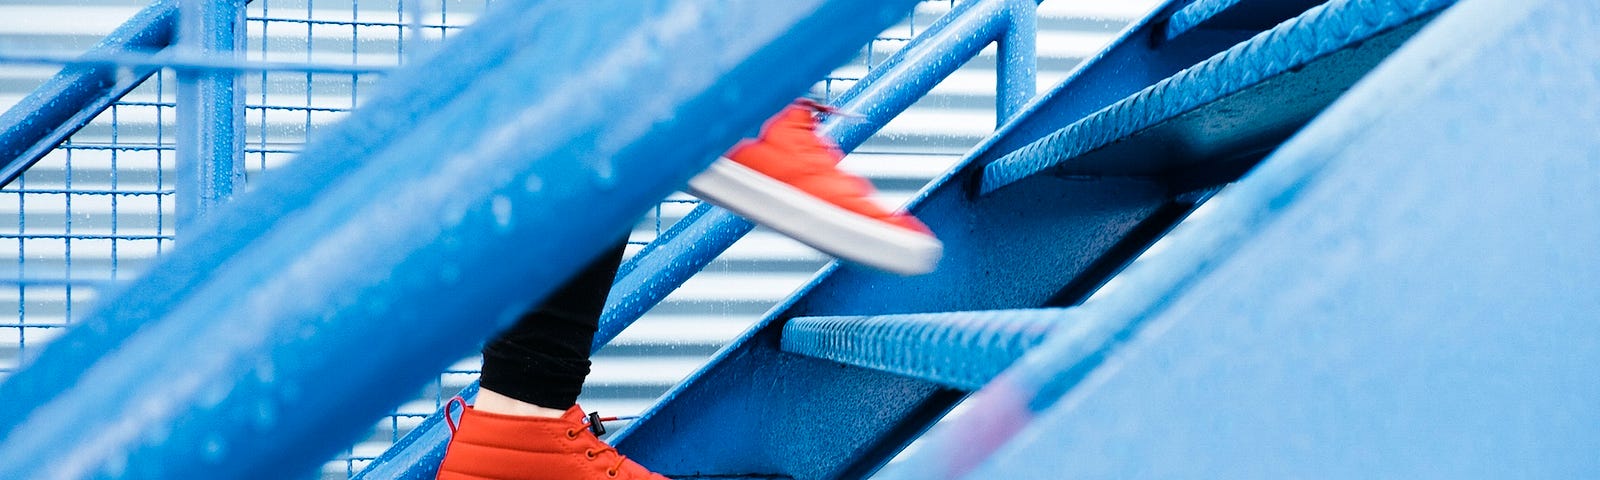 Red sneakers walking swiftly up a blue-tinged metallic staircase.